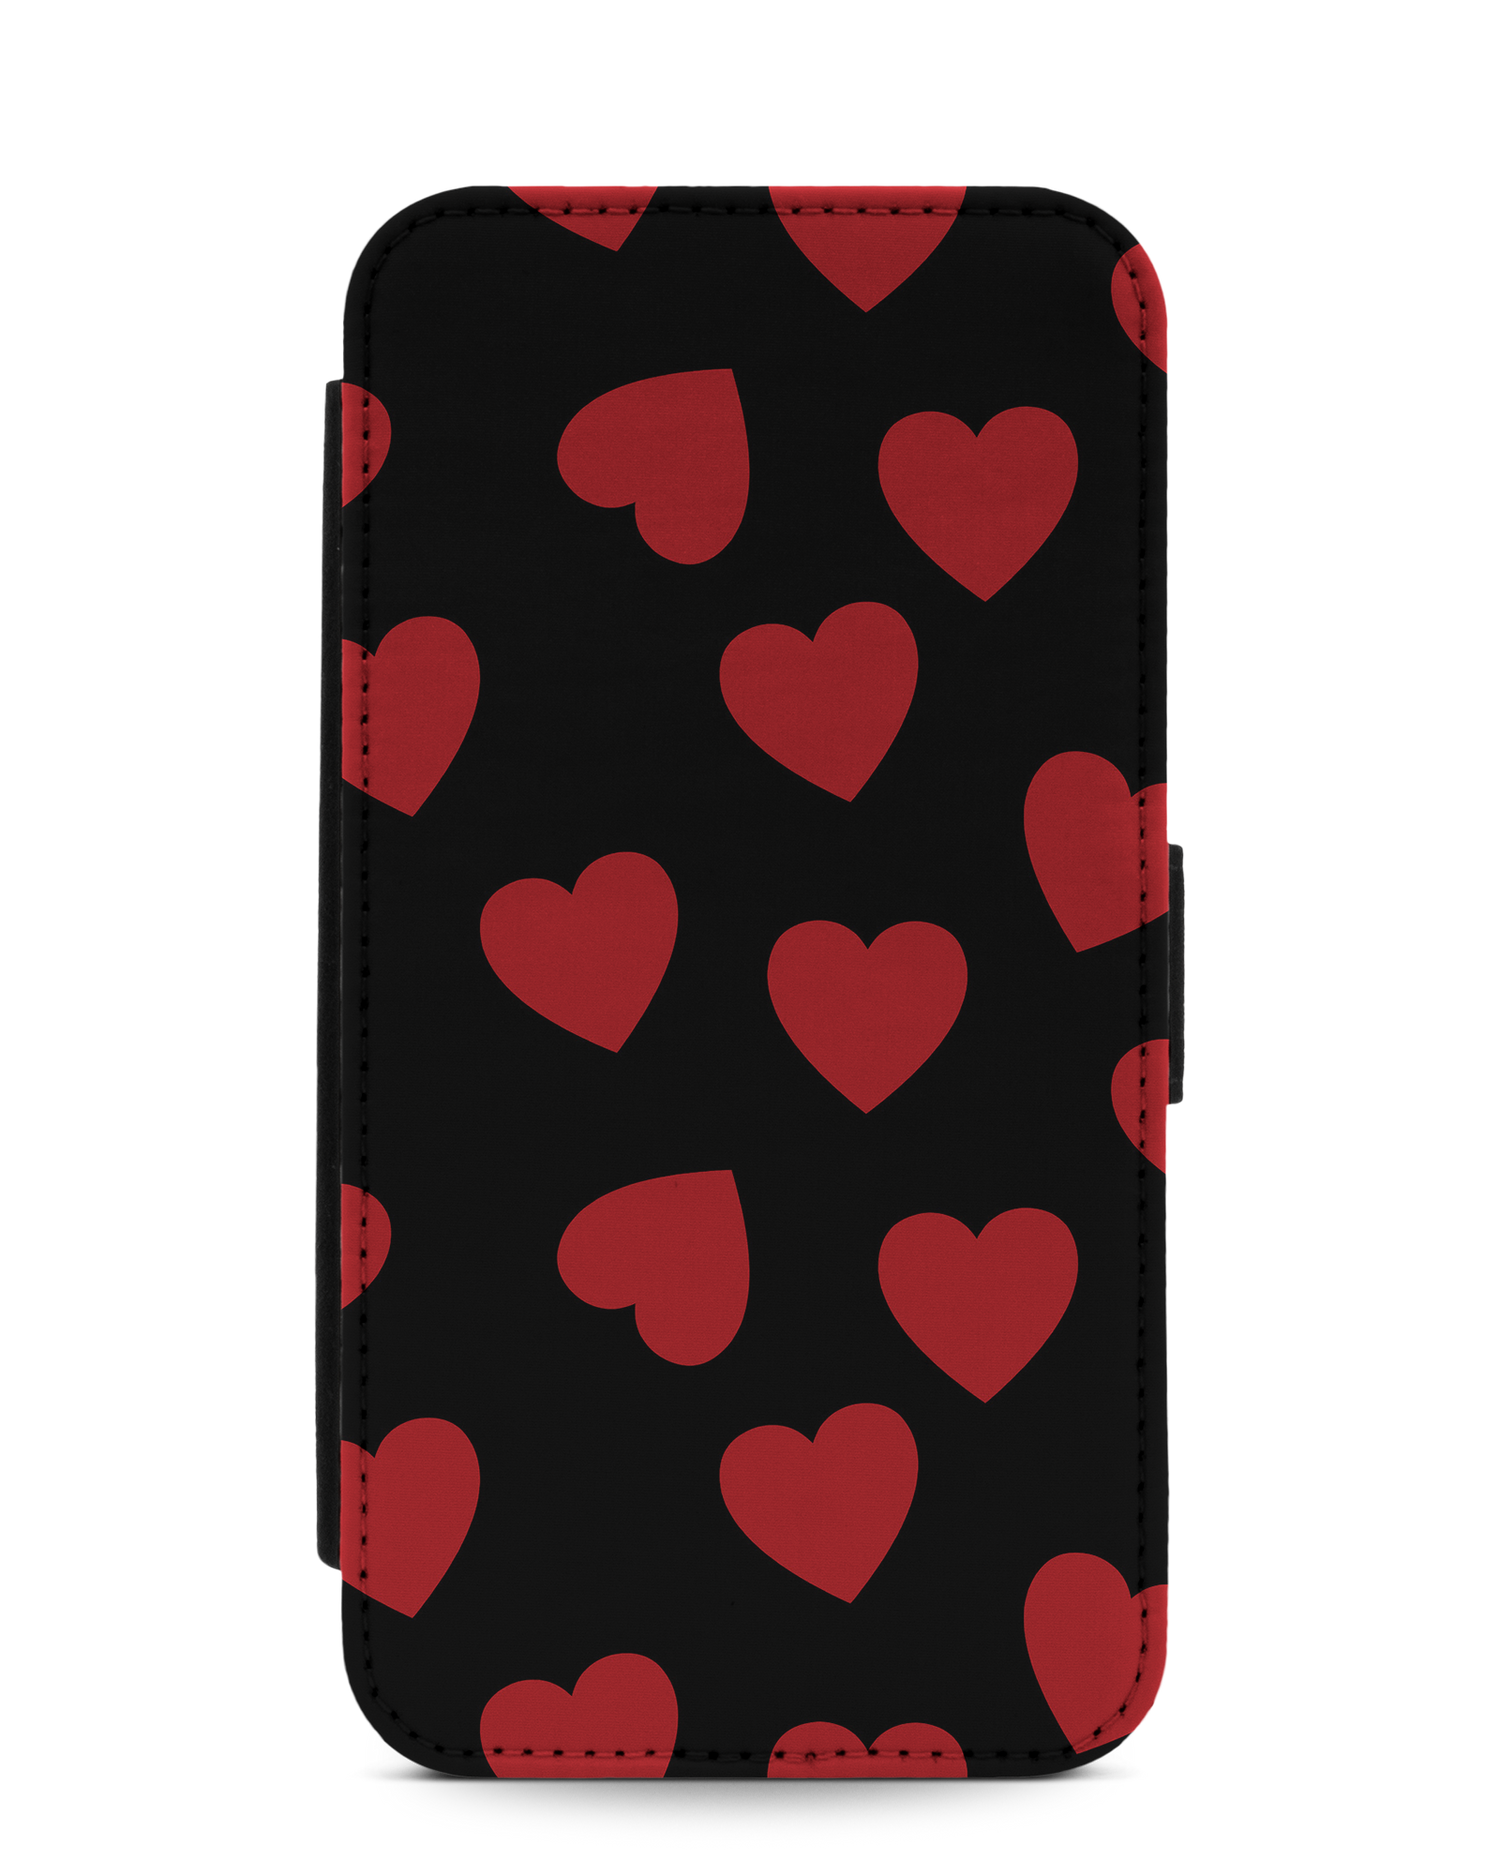 Repeating Hearts Wallet Phone Case Apple iPhone 11 Pro Max: Front View